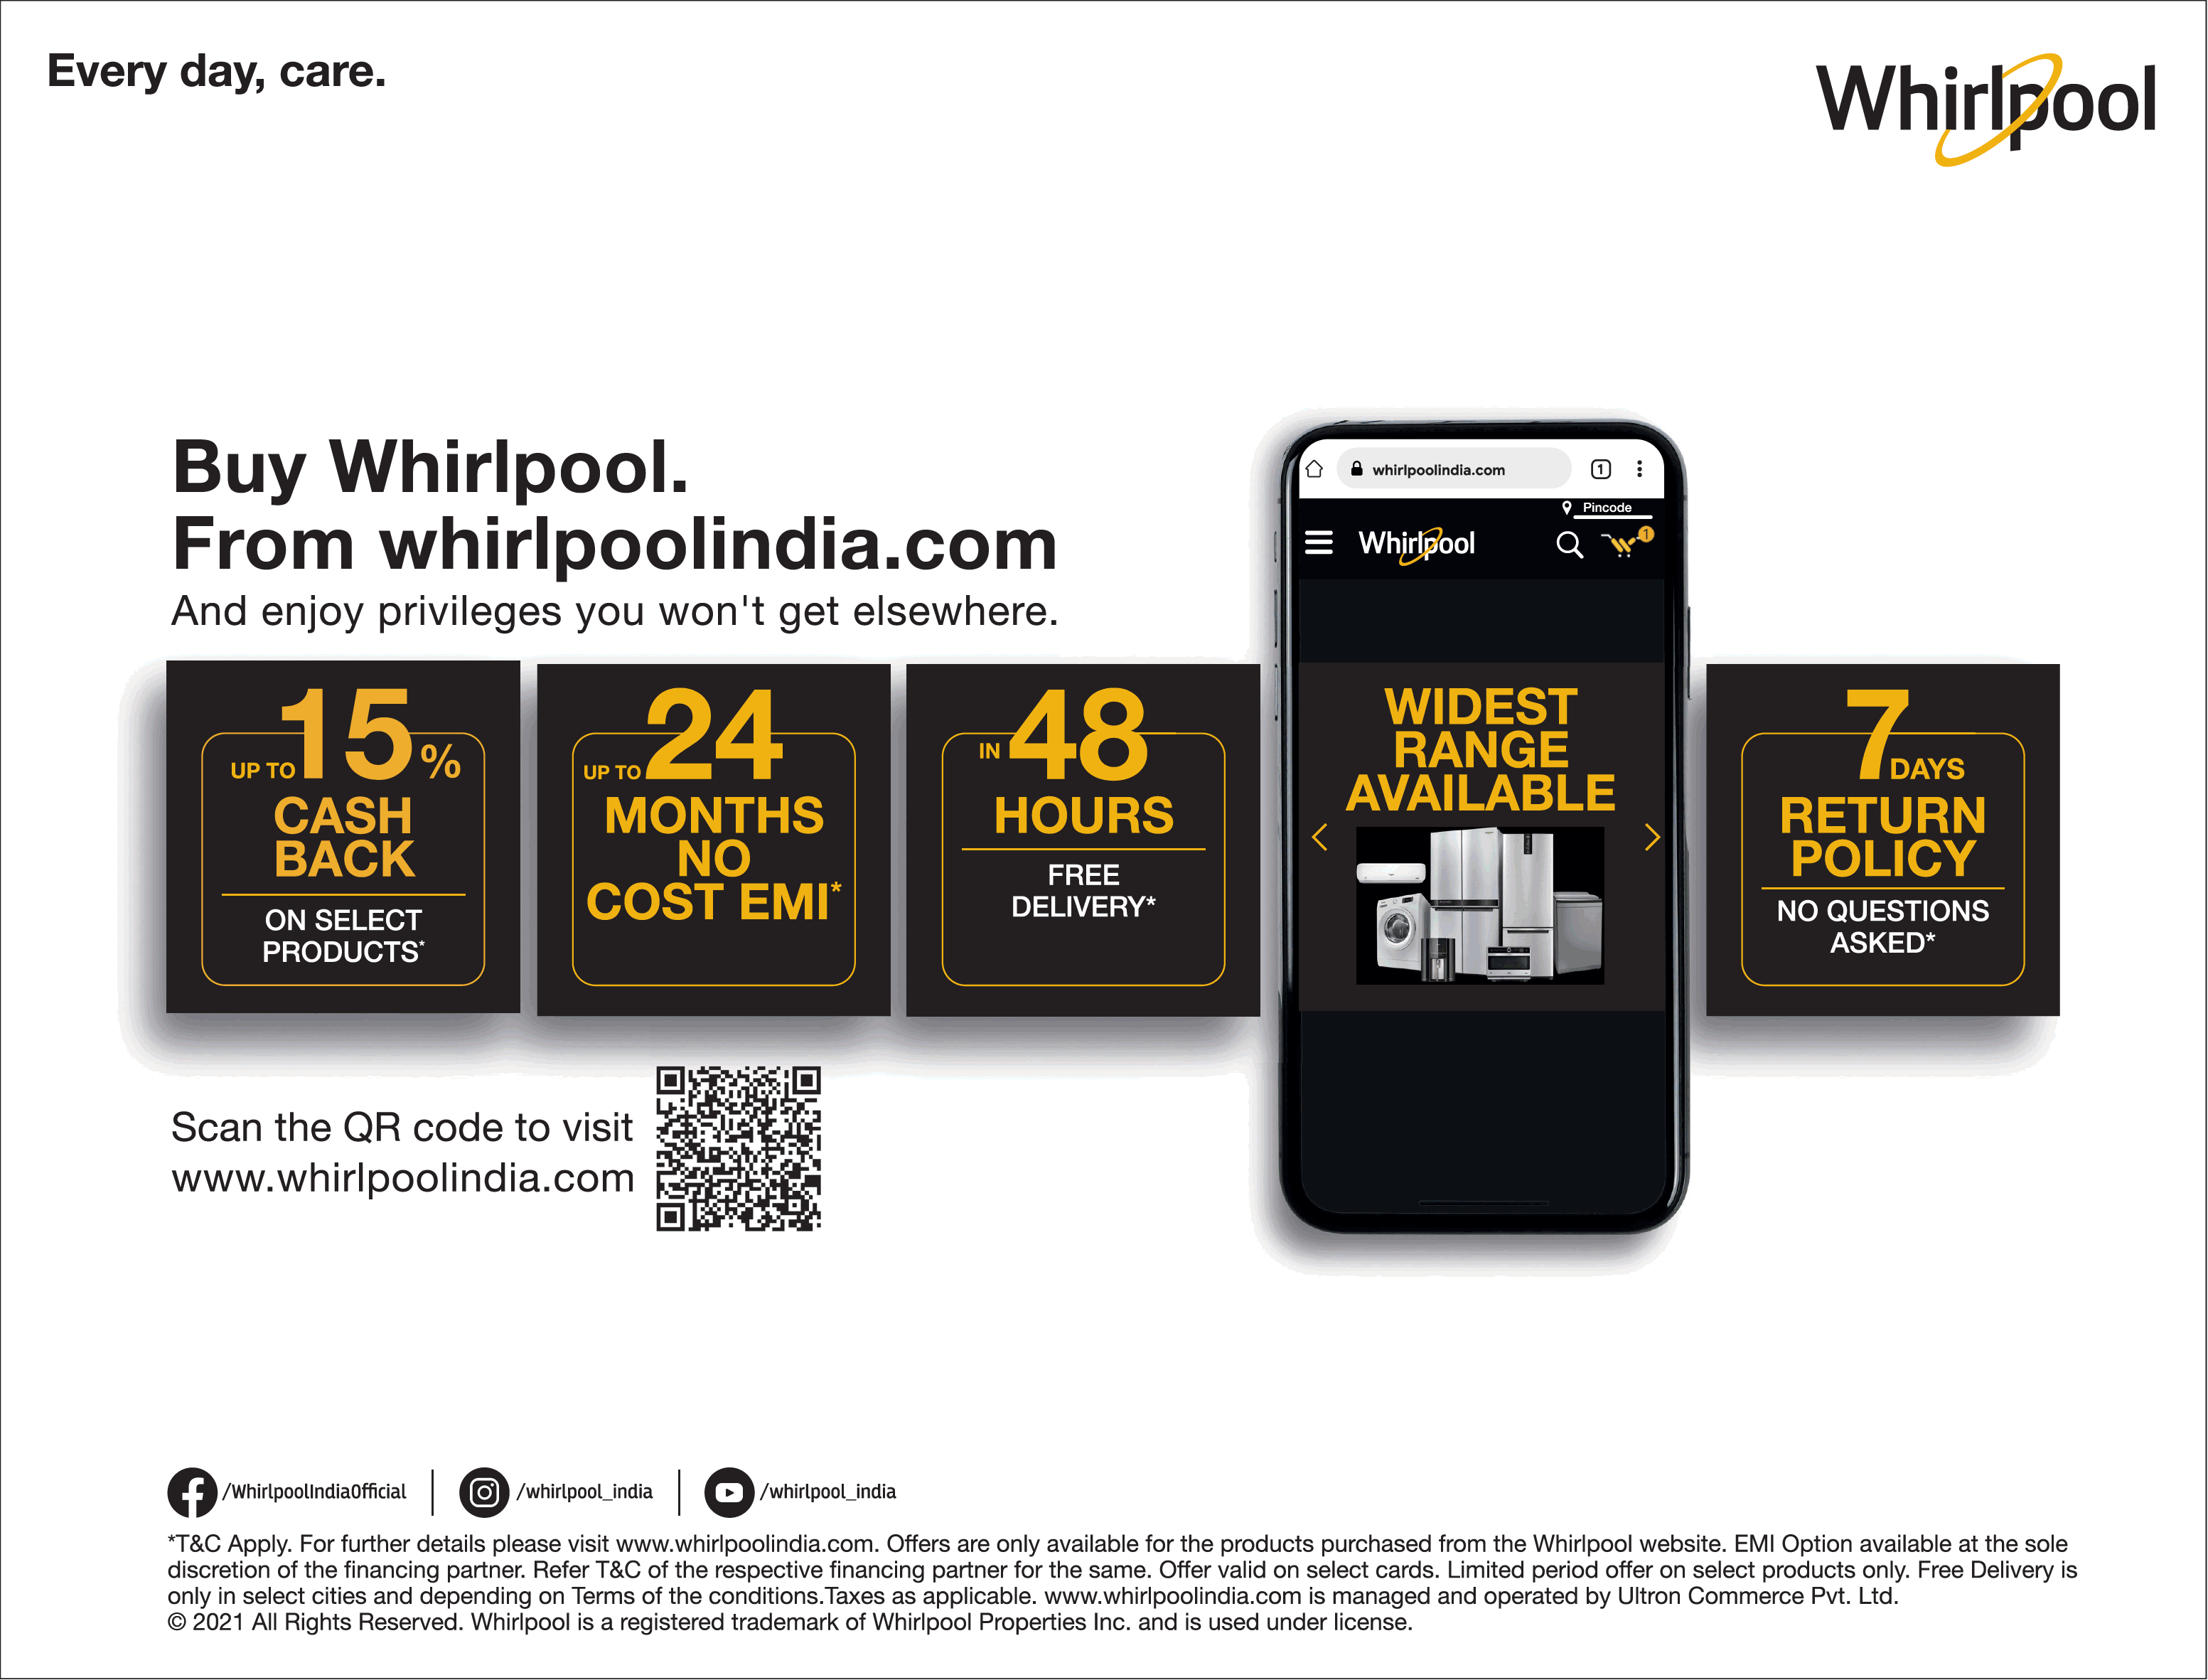 buy-whirlpool-from-whirlpoolindia-com-and-get-upto-15%-cash-back-ad-toi-delhi-11-7-2021